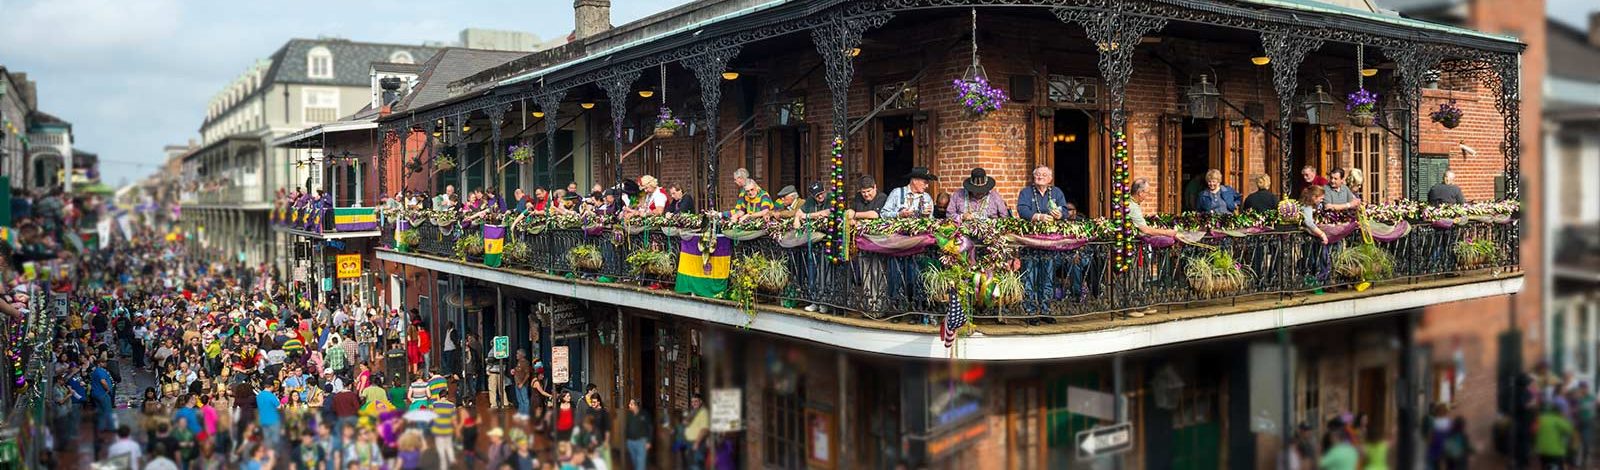 Why Is New Orleans Called The Big Easy?